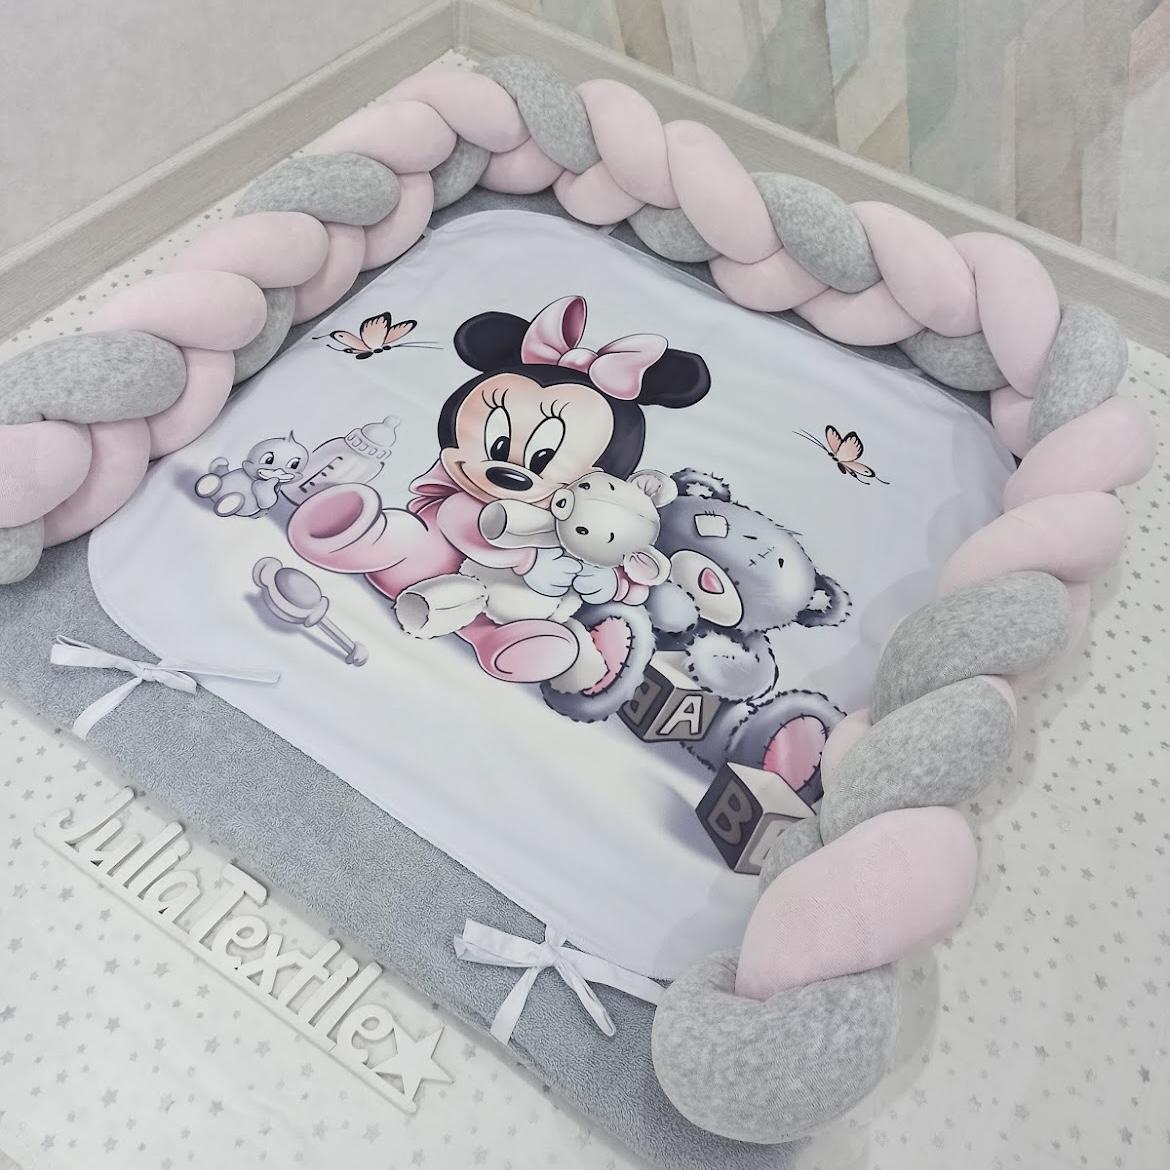 Changing table with minnie print with pink gray teddy bear